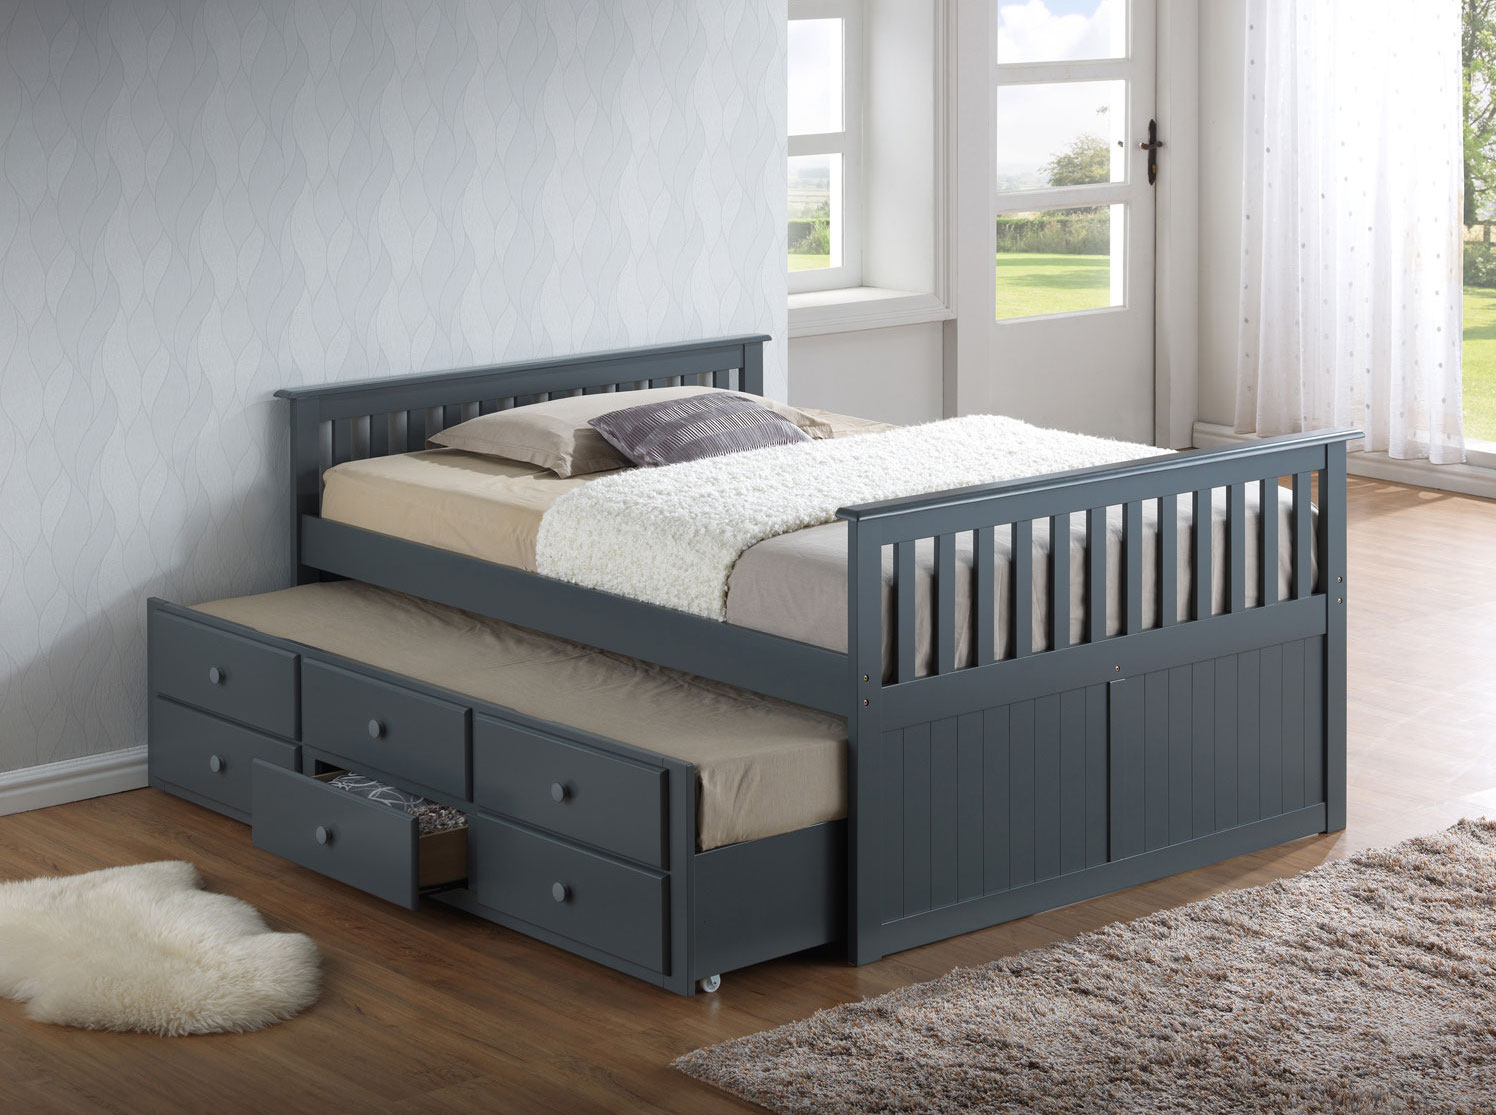 toddler beds - broyhill kids captains bed